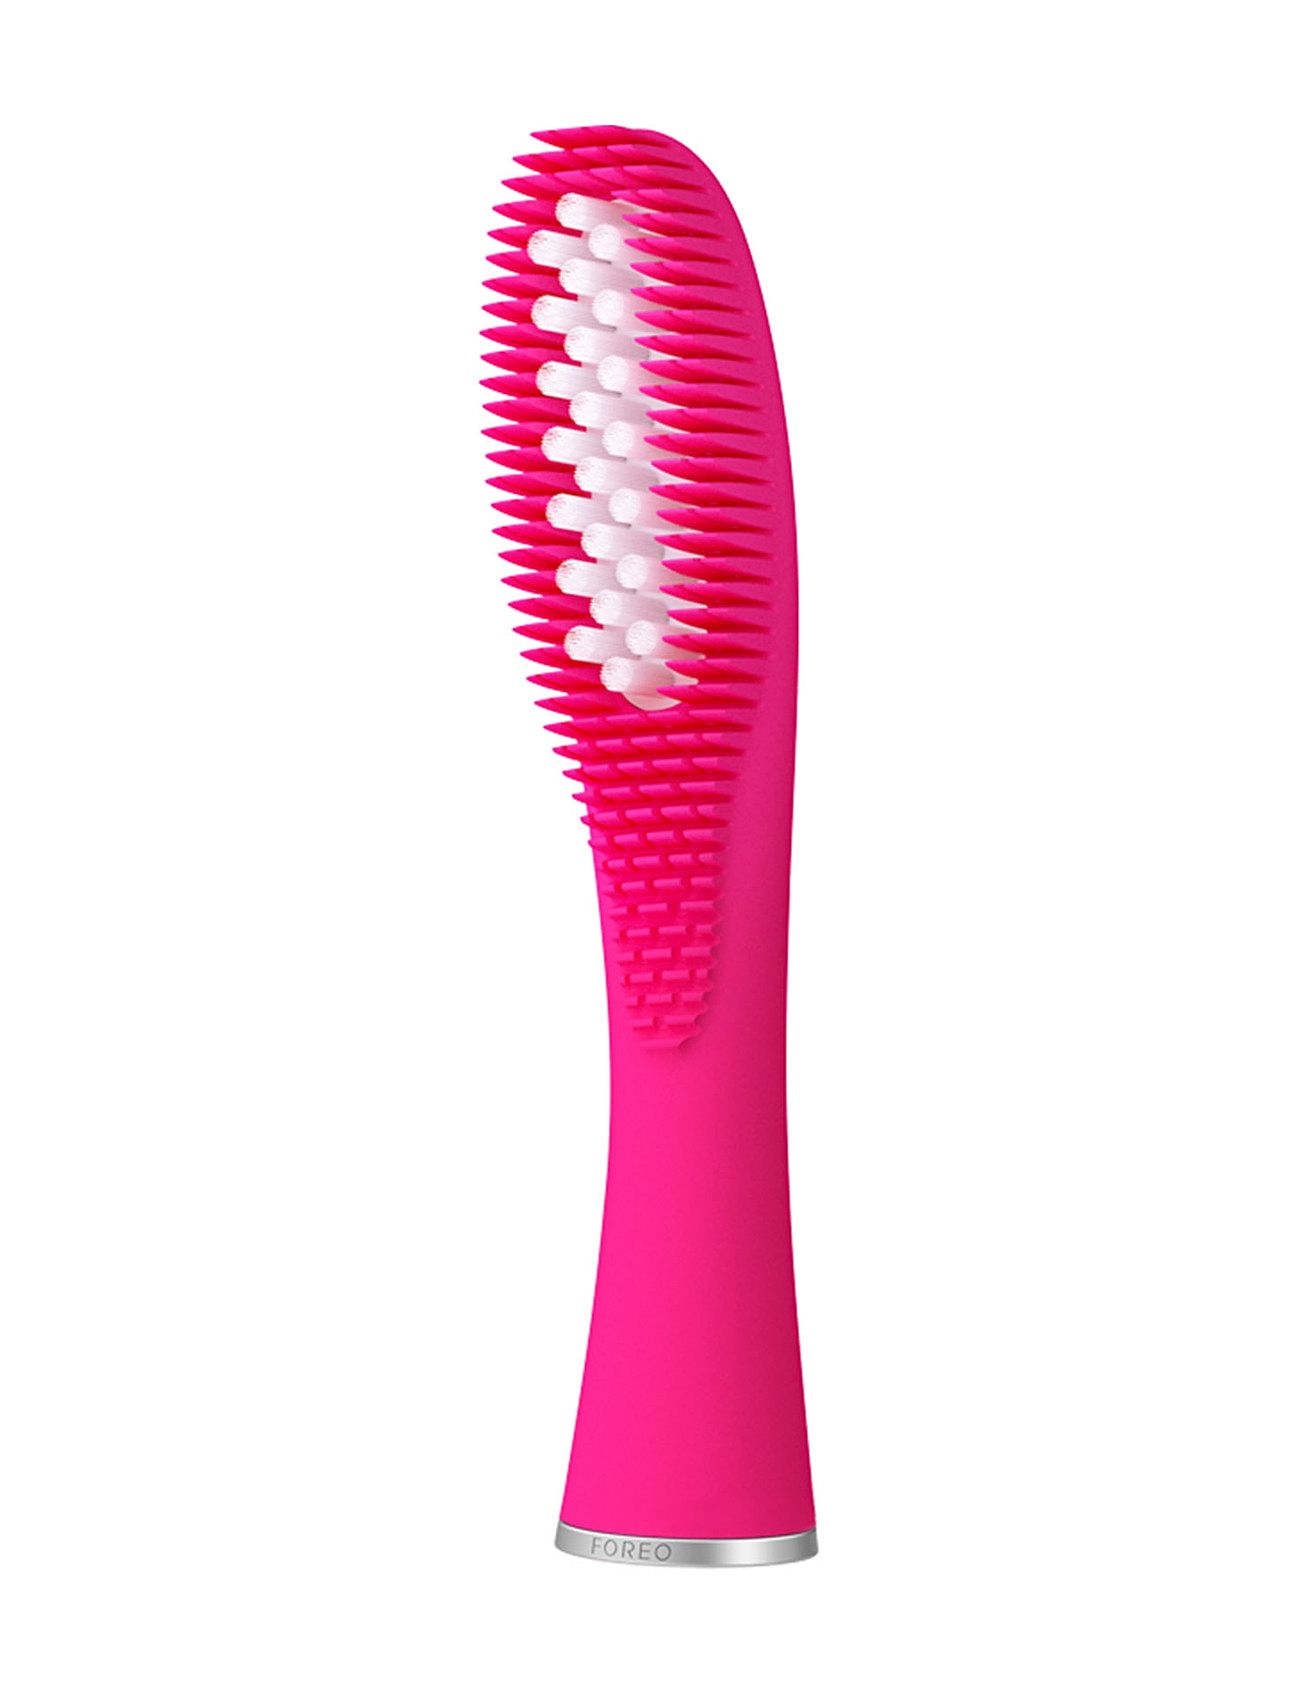 Issa™ Hybrid Wave Brush Head Fuchsia Beauty Women Home Oral Hygiene Toothbrushes Pink Foreo